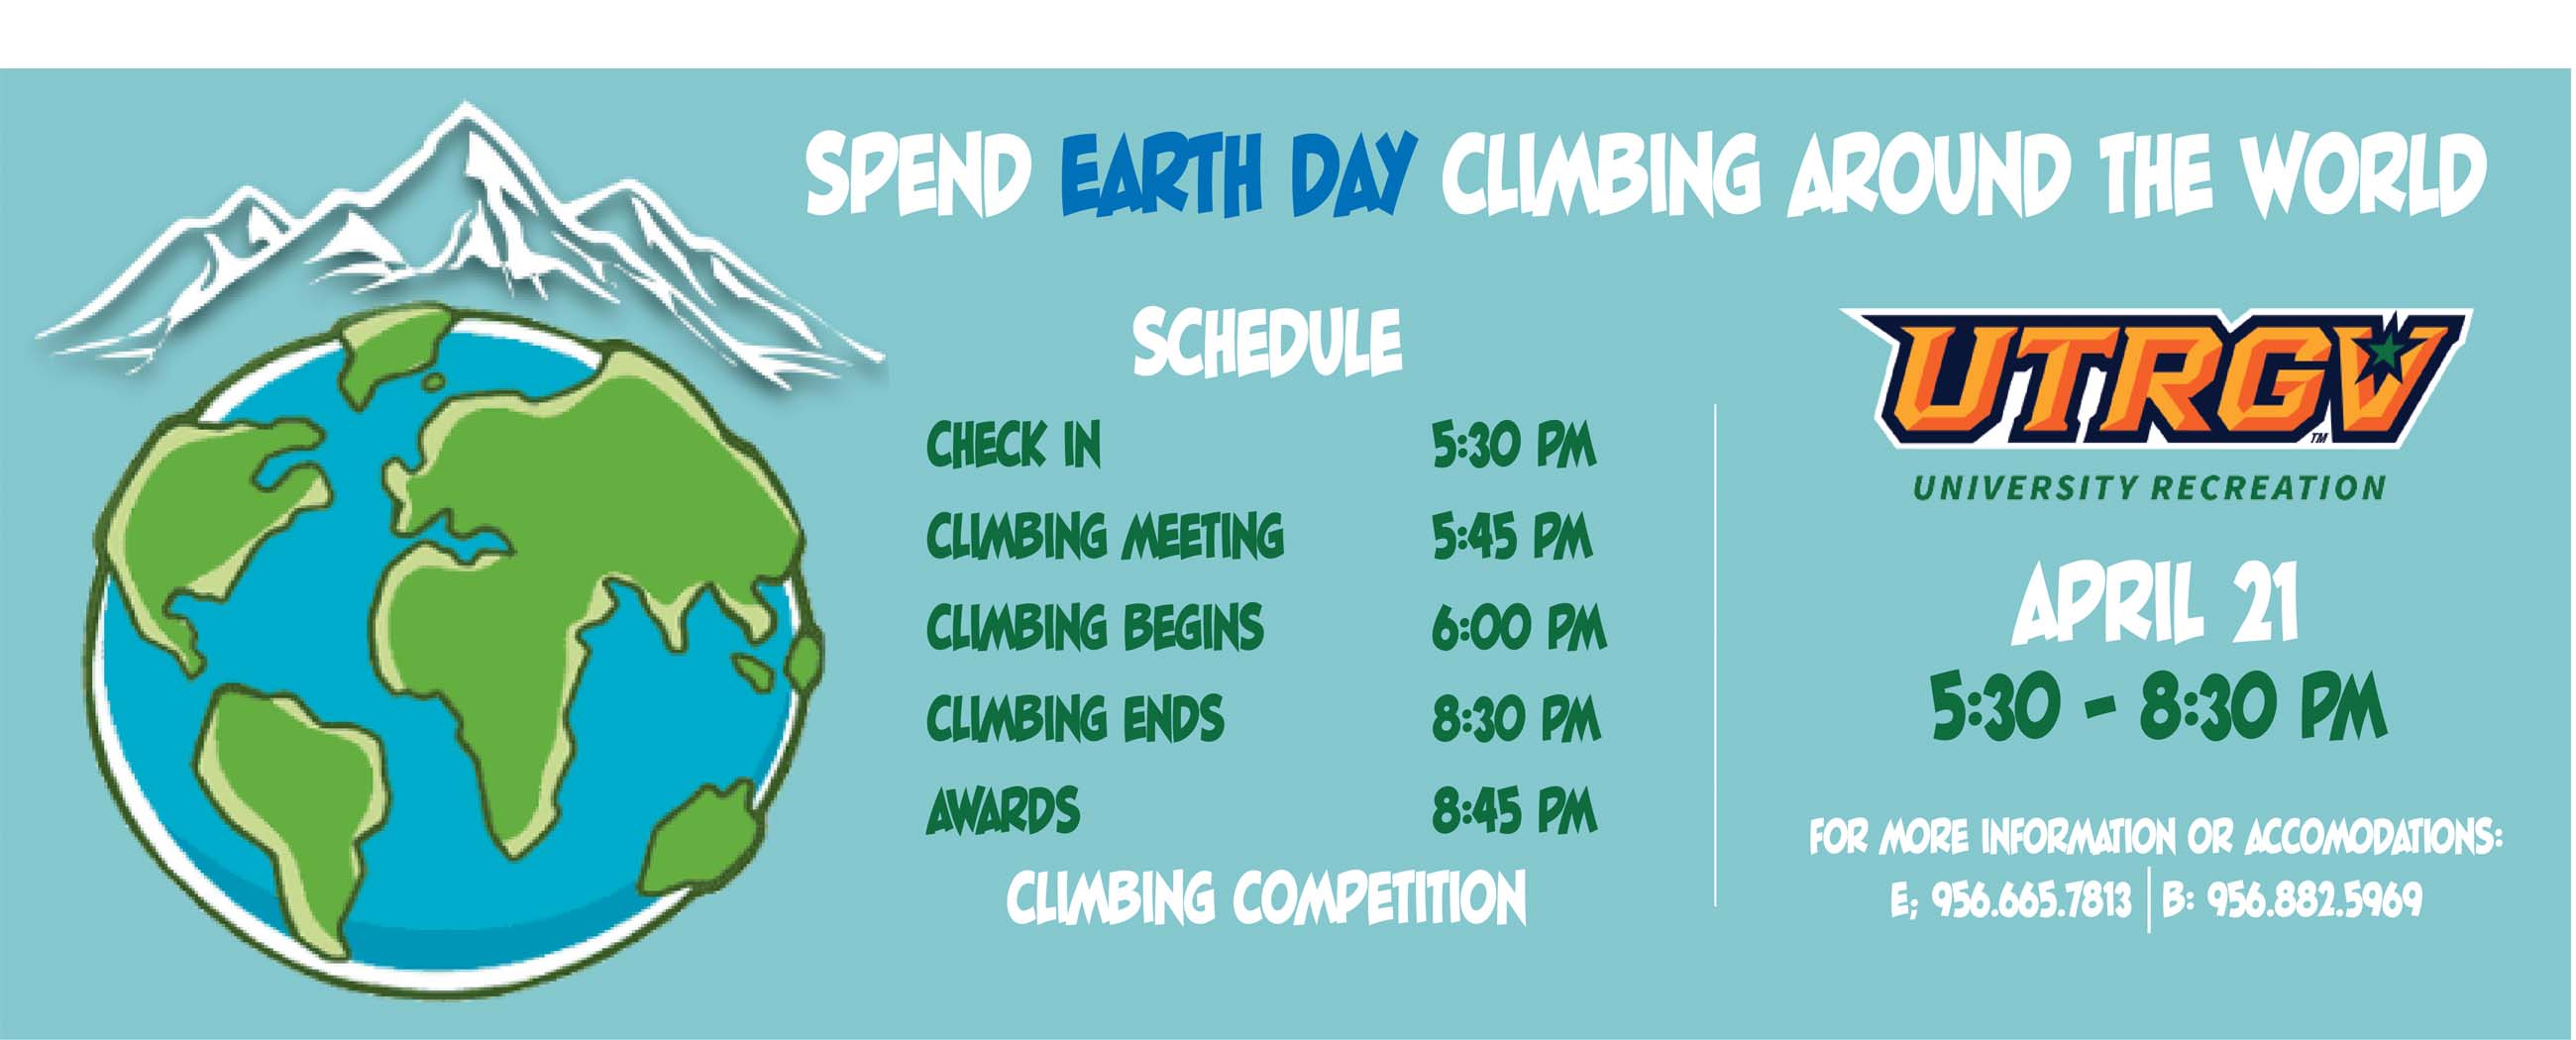 Spend Earth Day Climbing Around the World. UTRGV University Recreation on April 21 5:30 - 8:30 PM. Schedule: Check in 5:30PM, Climbing Meeting 5:45 PM, Climbing Begins 6:00 PM, Climbing Ends 8:30PM, Awards 8:45PM. Climbing Competition Page Banner 